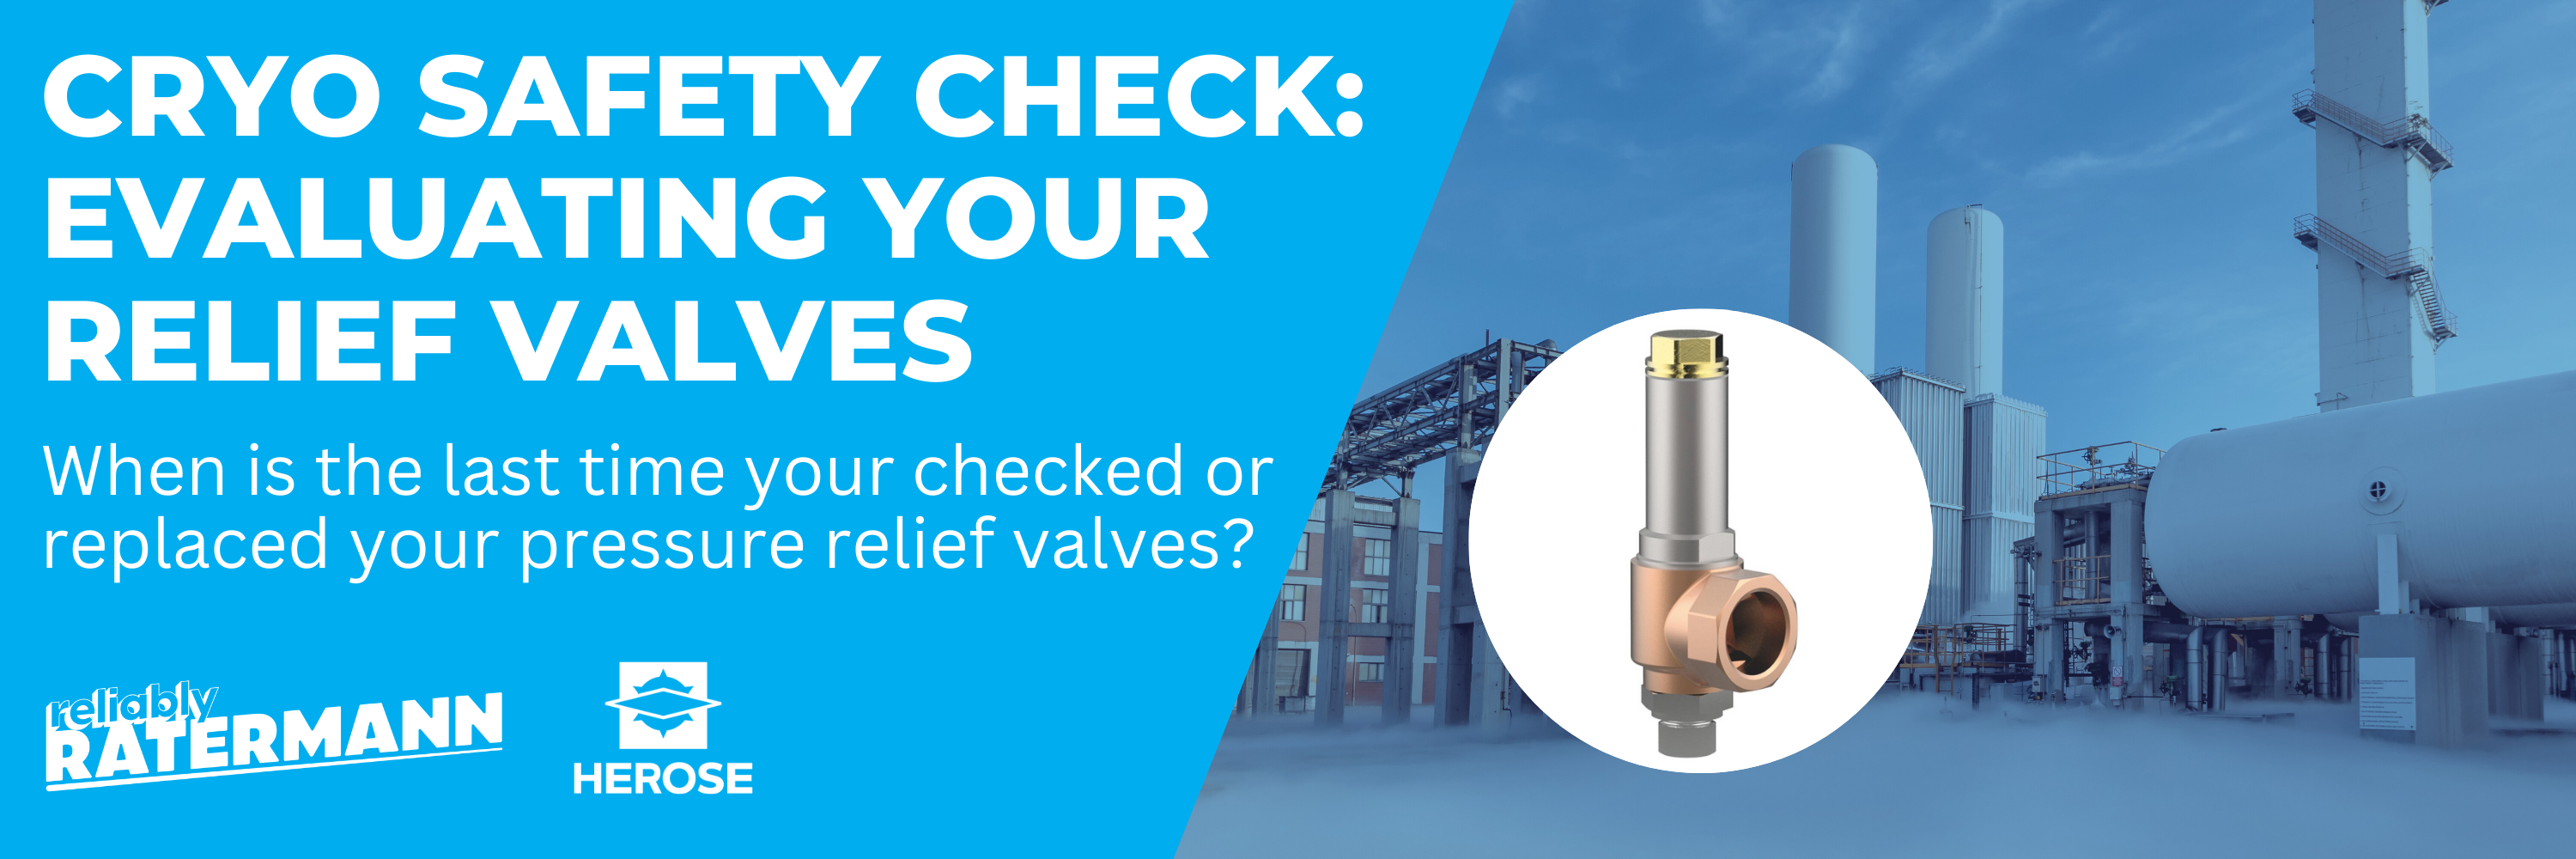 Cryo Safety Check: Evaluating Your Relief Valves